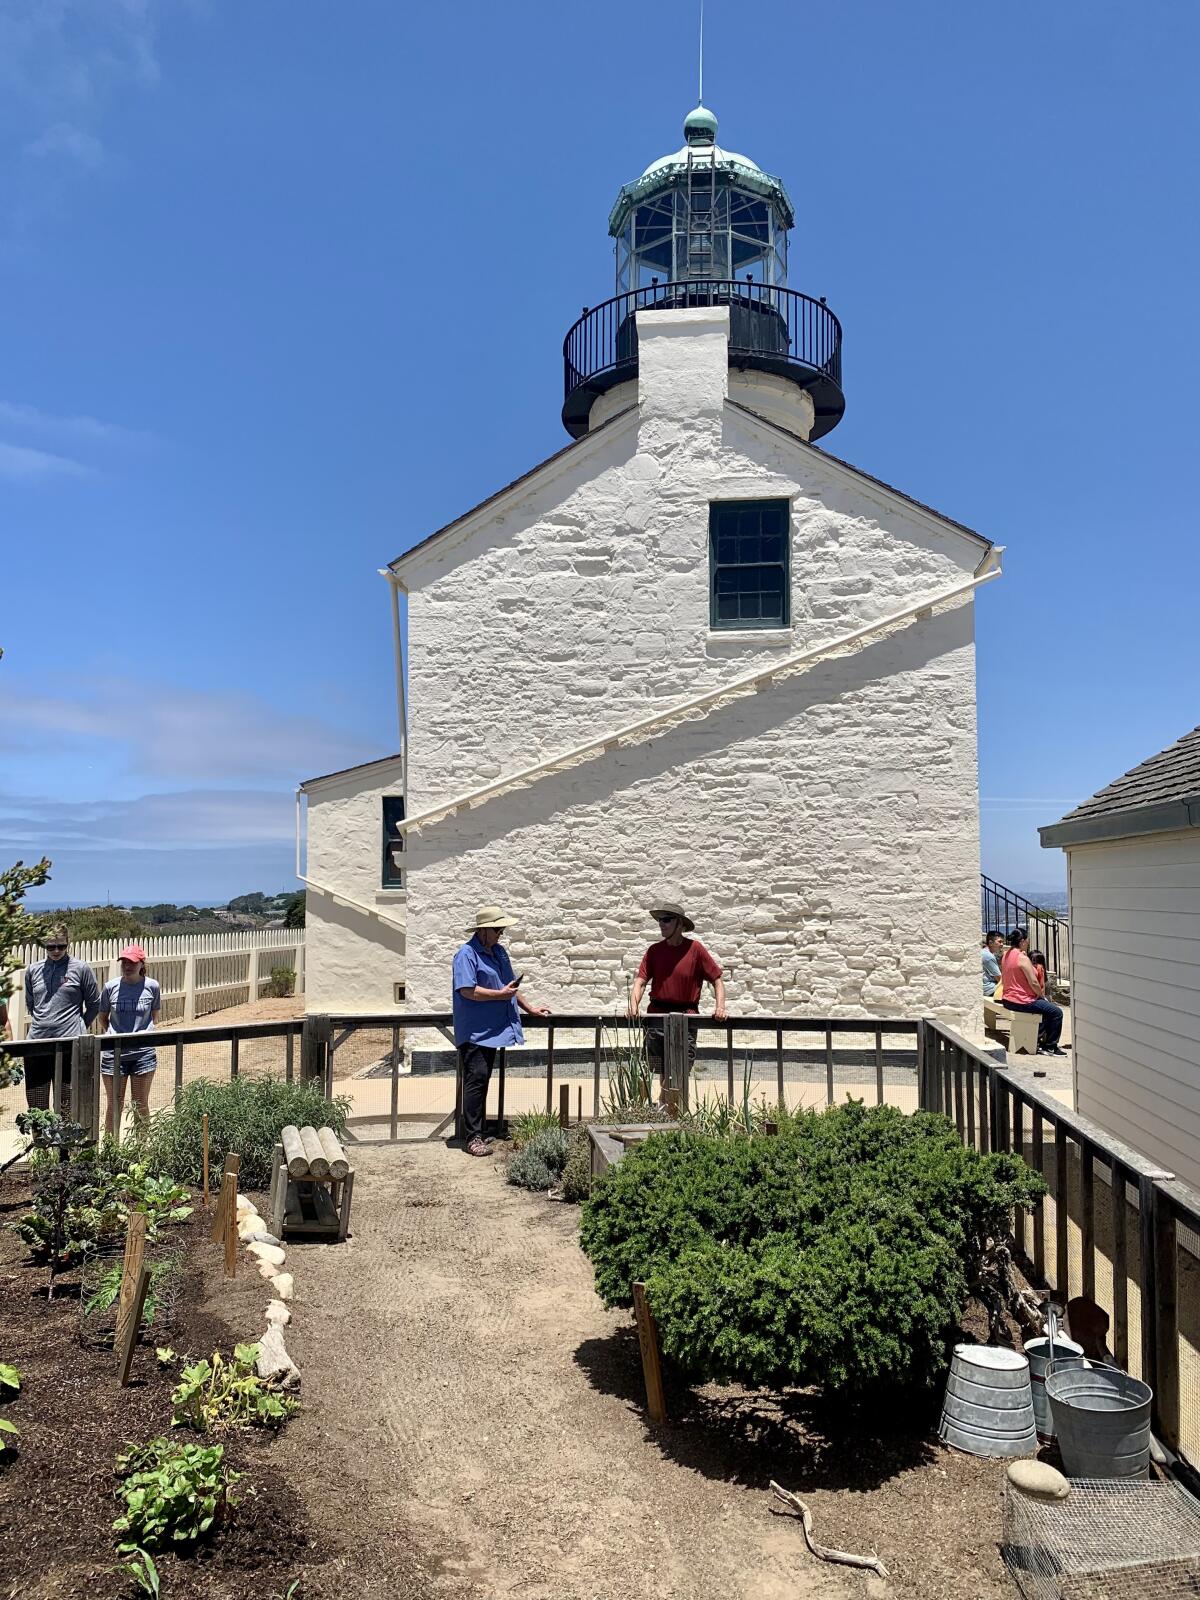 Visitors check out the replica kitchen garden at the lighthouse at Cabrillo National Monument.